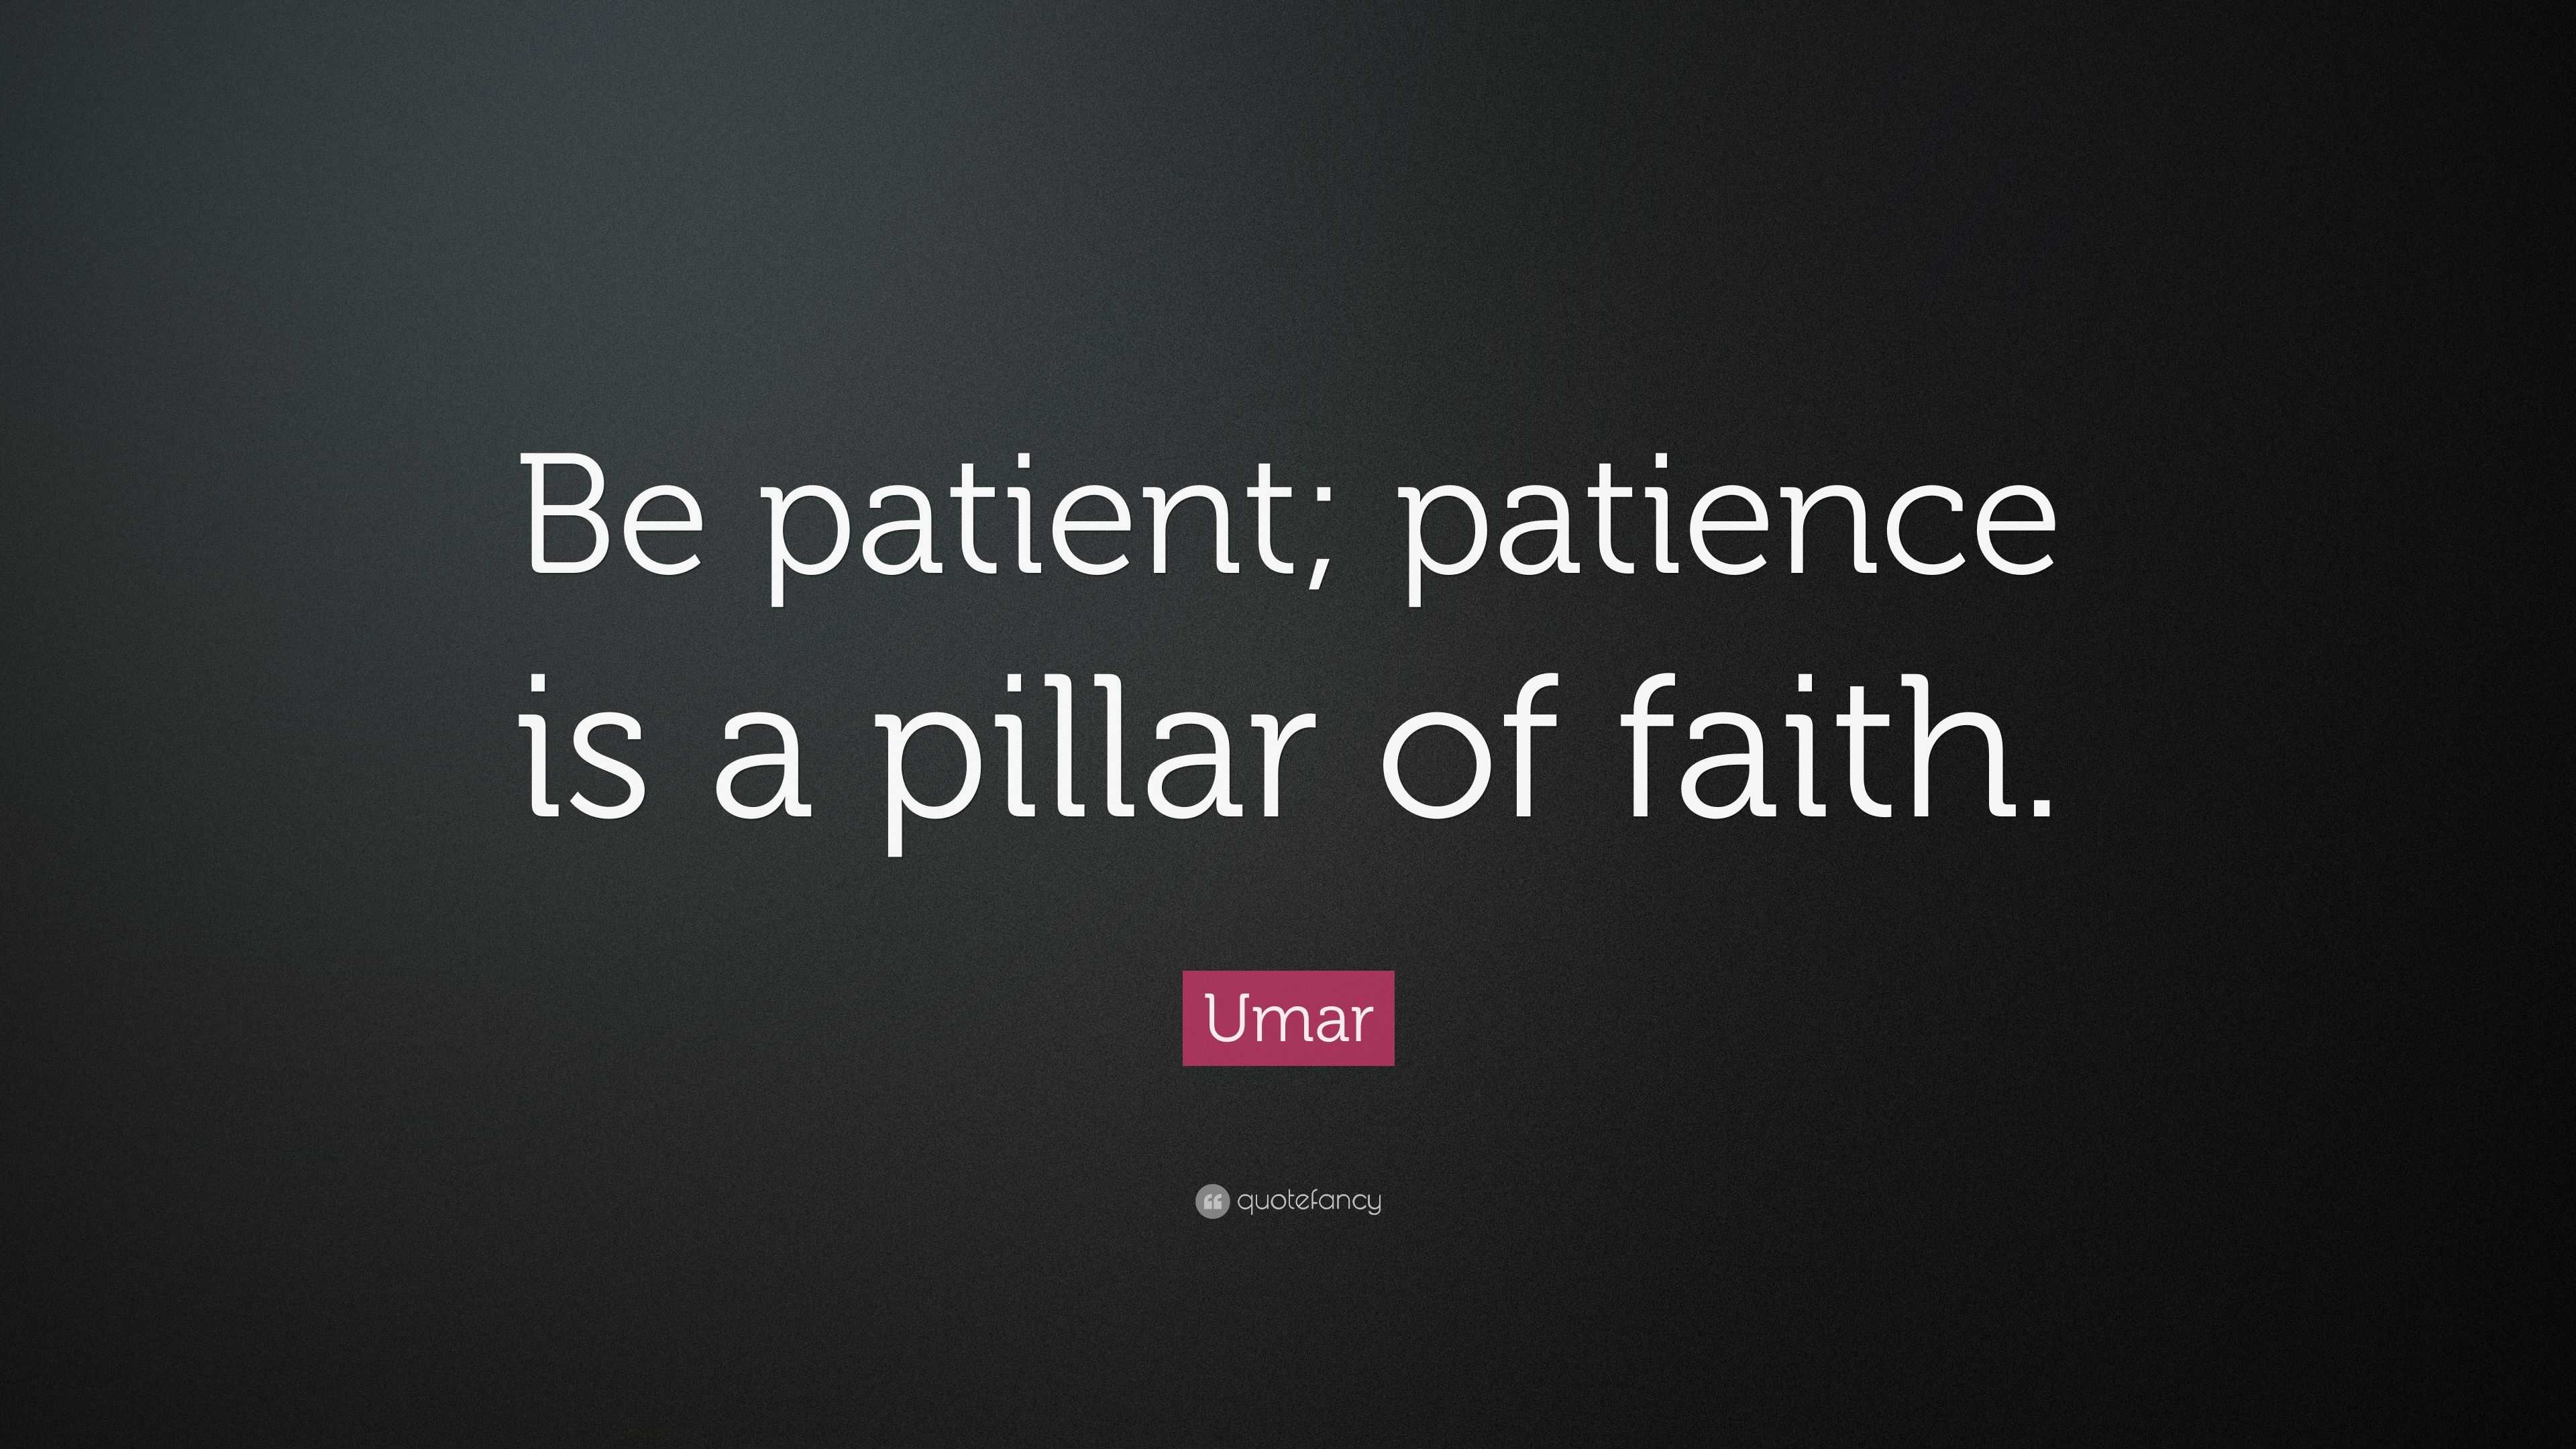 Umar Quote: “Be patient; patience is a pillar of faith.”